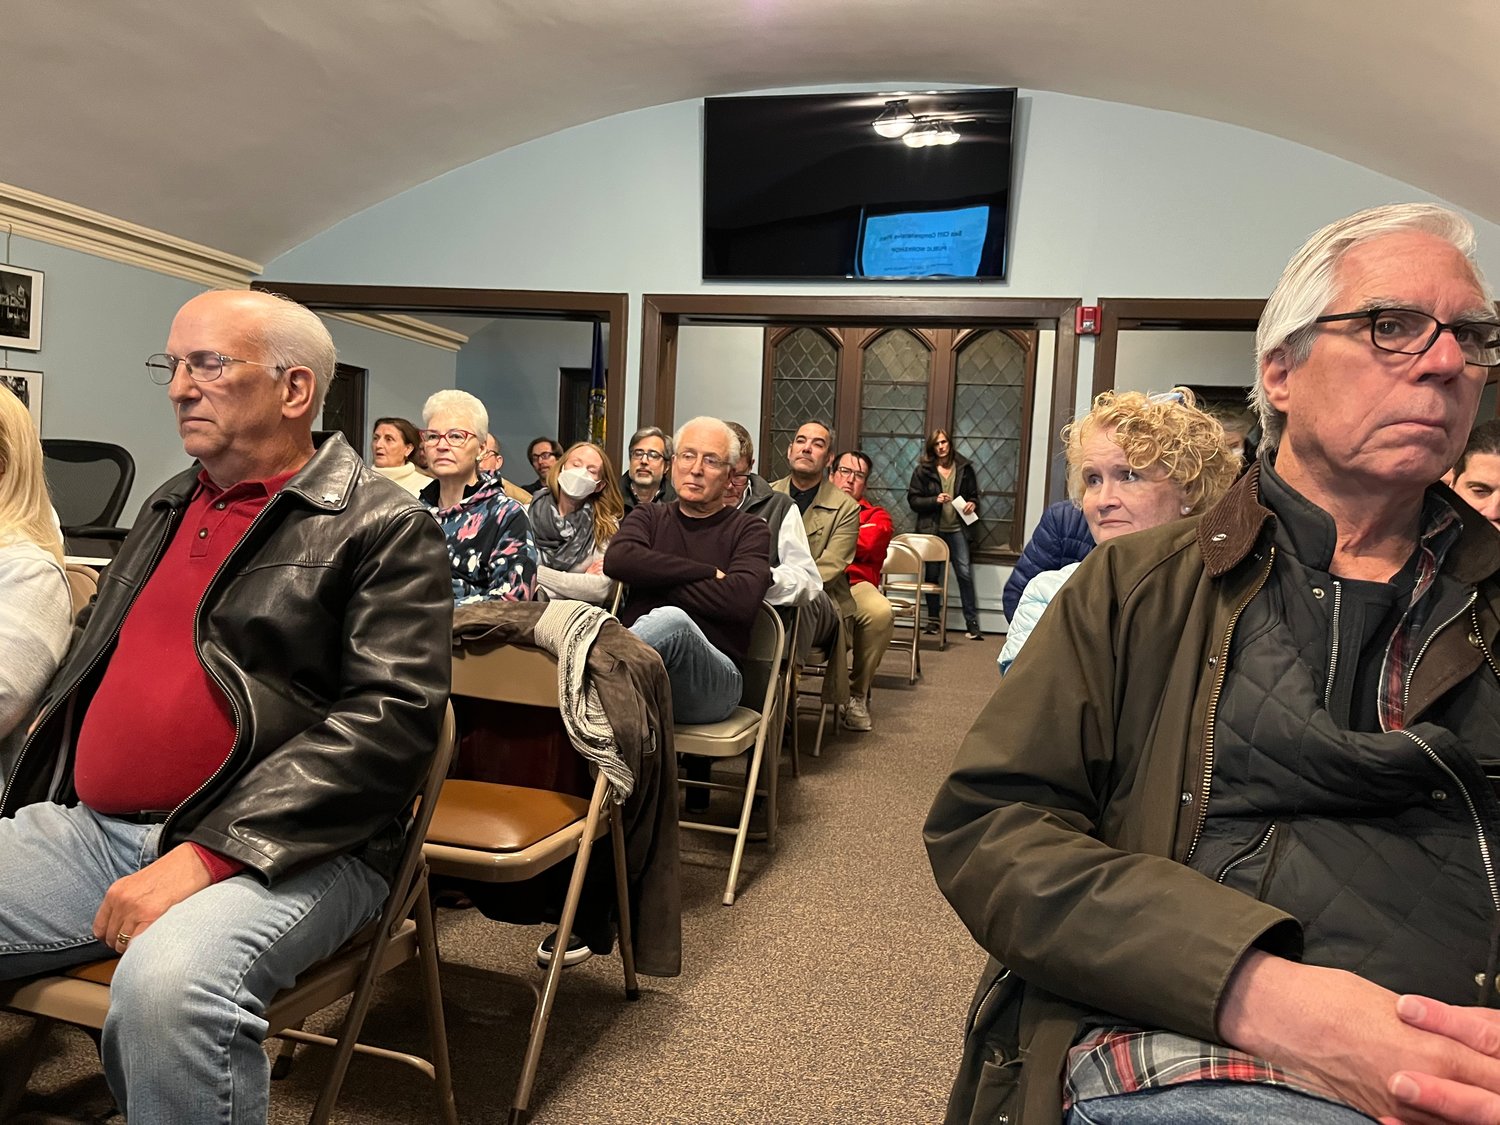 The room was filled with residents there to listen and share their thoughts at the village’s first public Comprehensive Plan meeting.